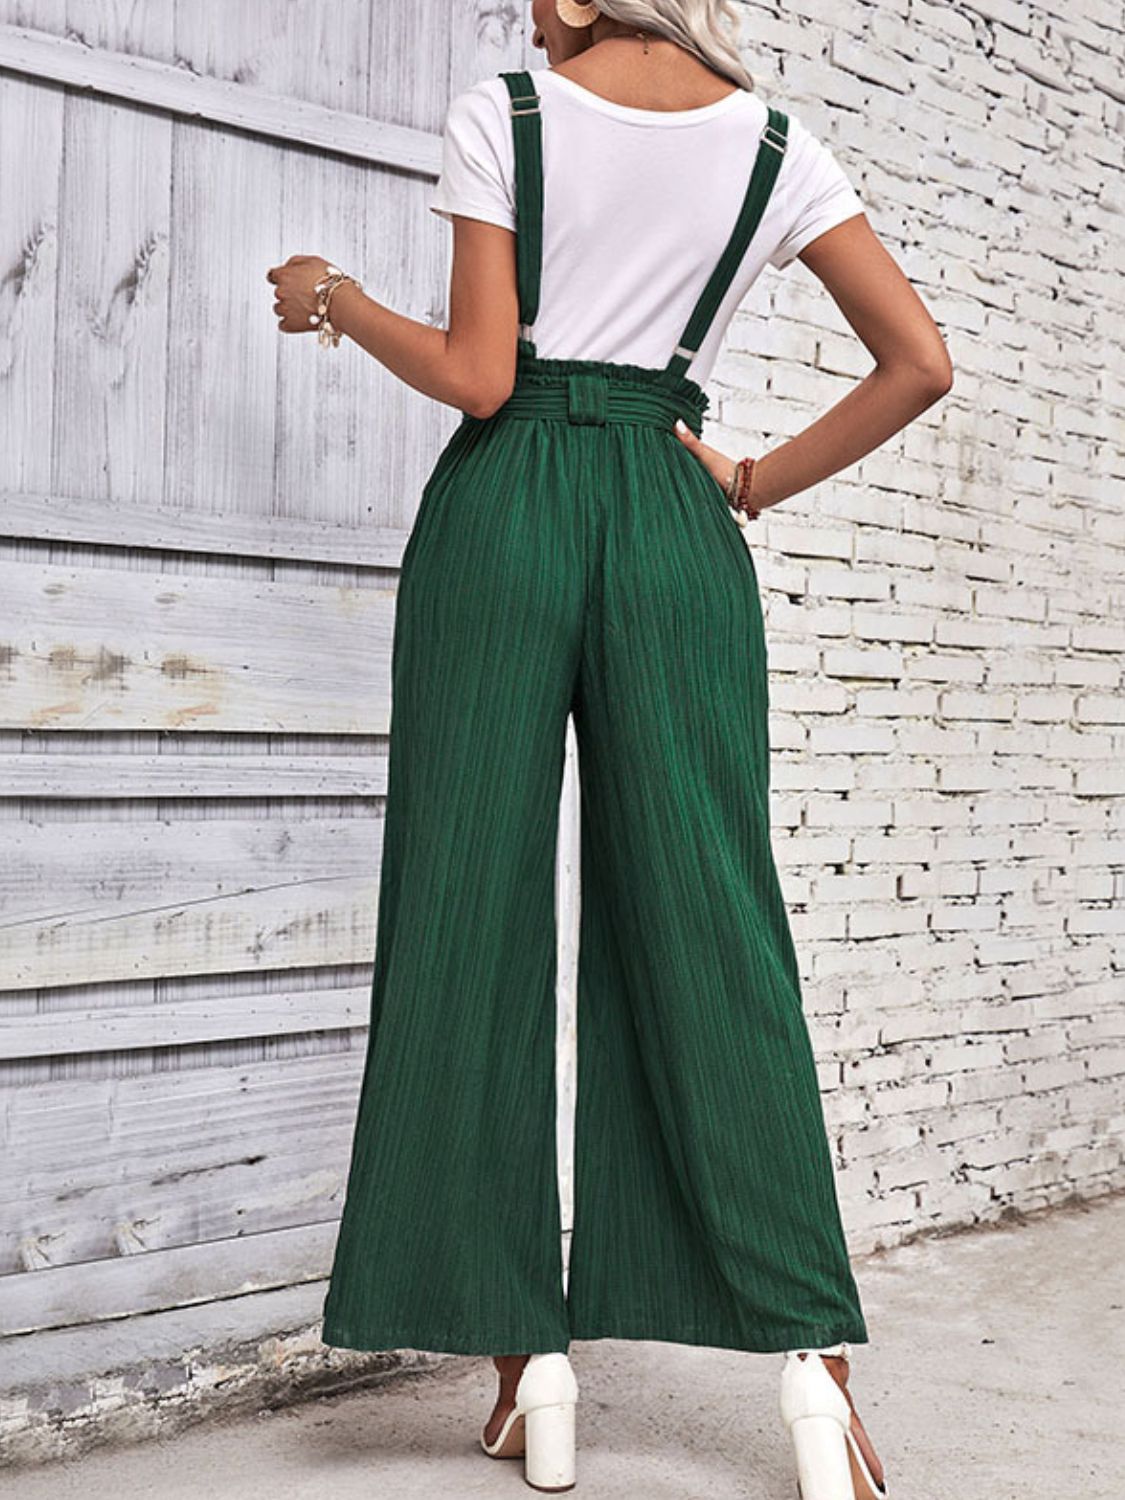 Tie Belt Wide Leg Overalls Print on any thing USA/STOD clothes